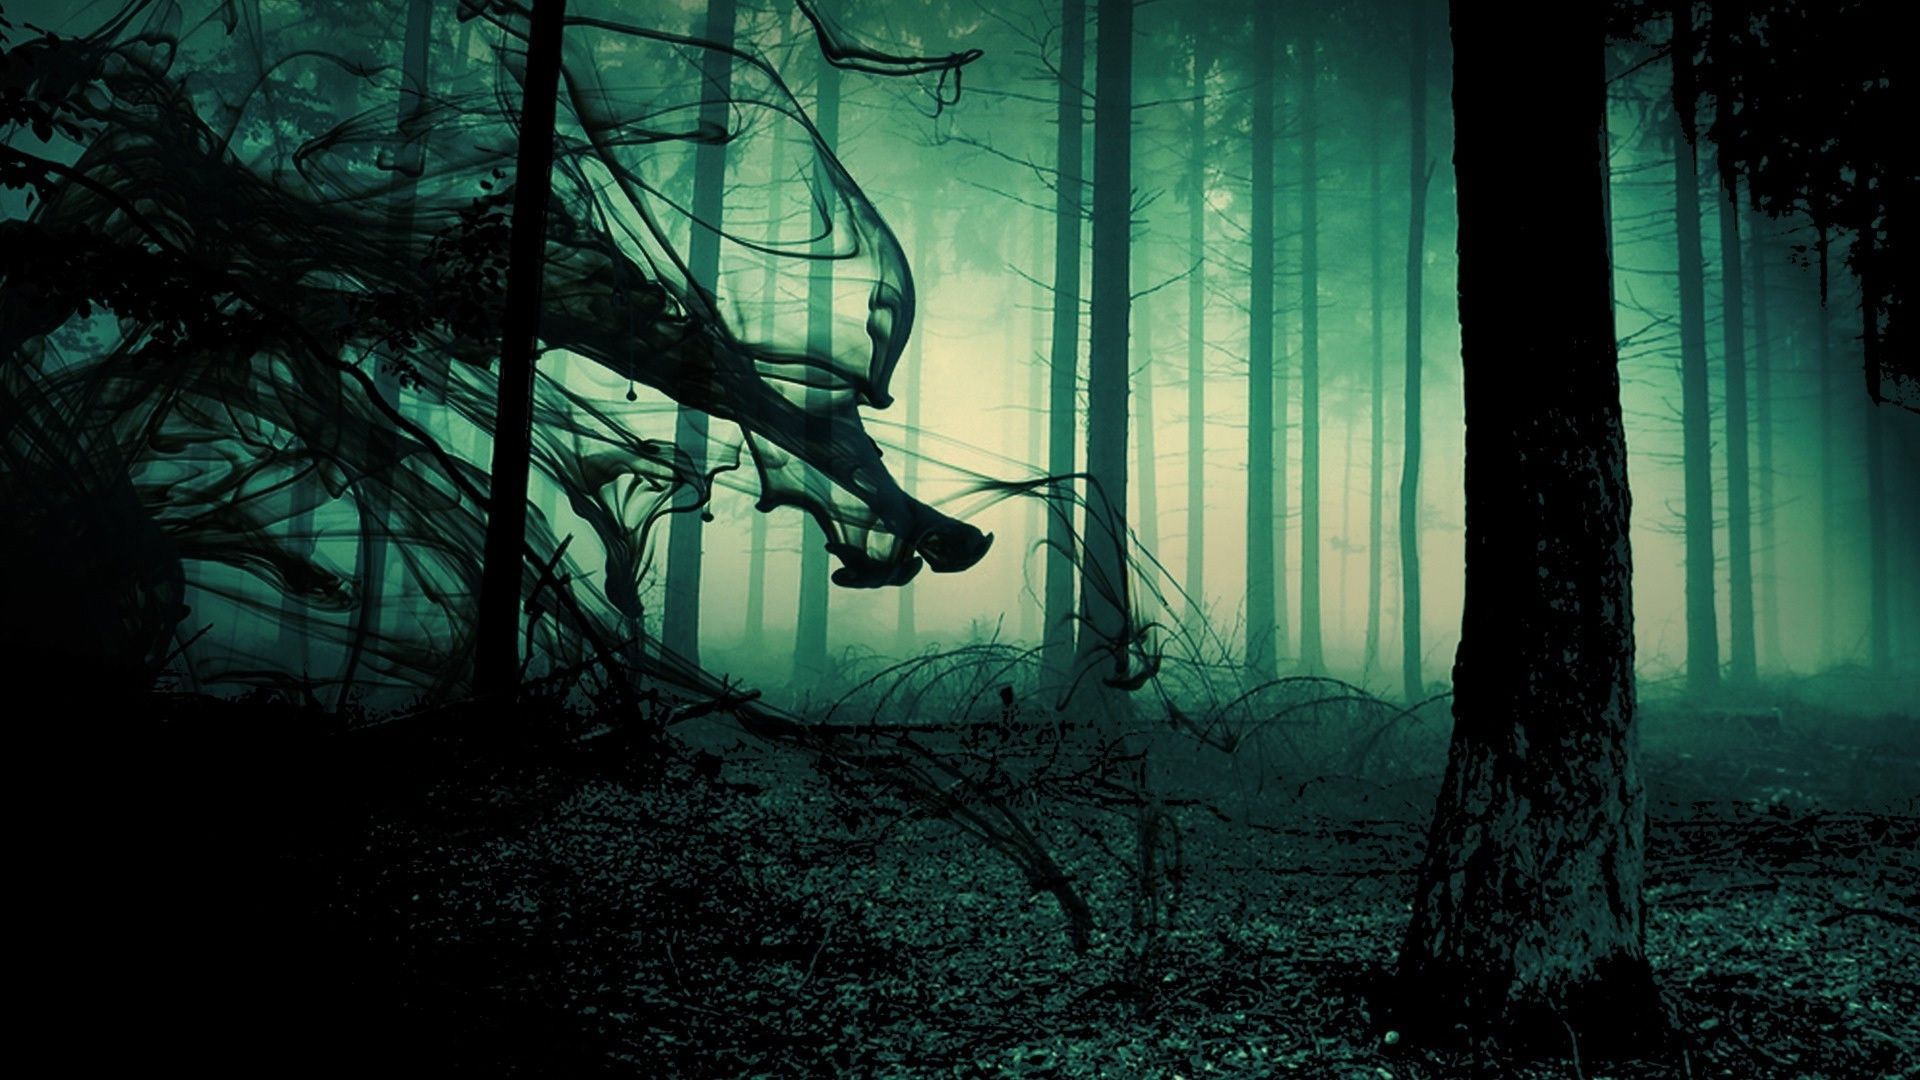 spooky forest background - Google Search | Backgrounds and ...